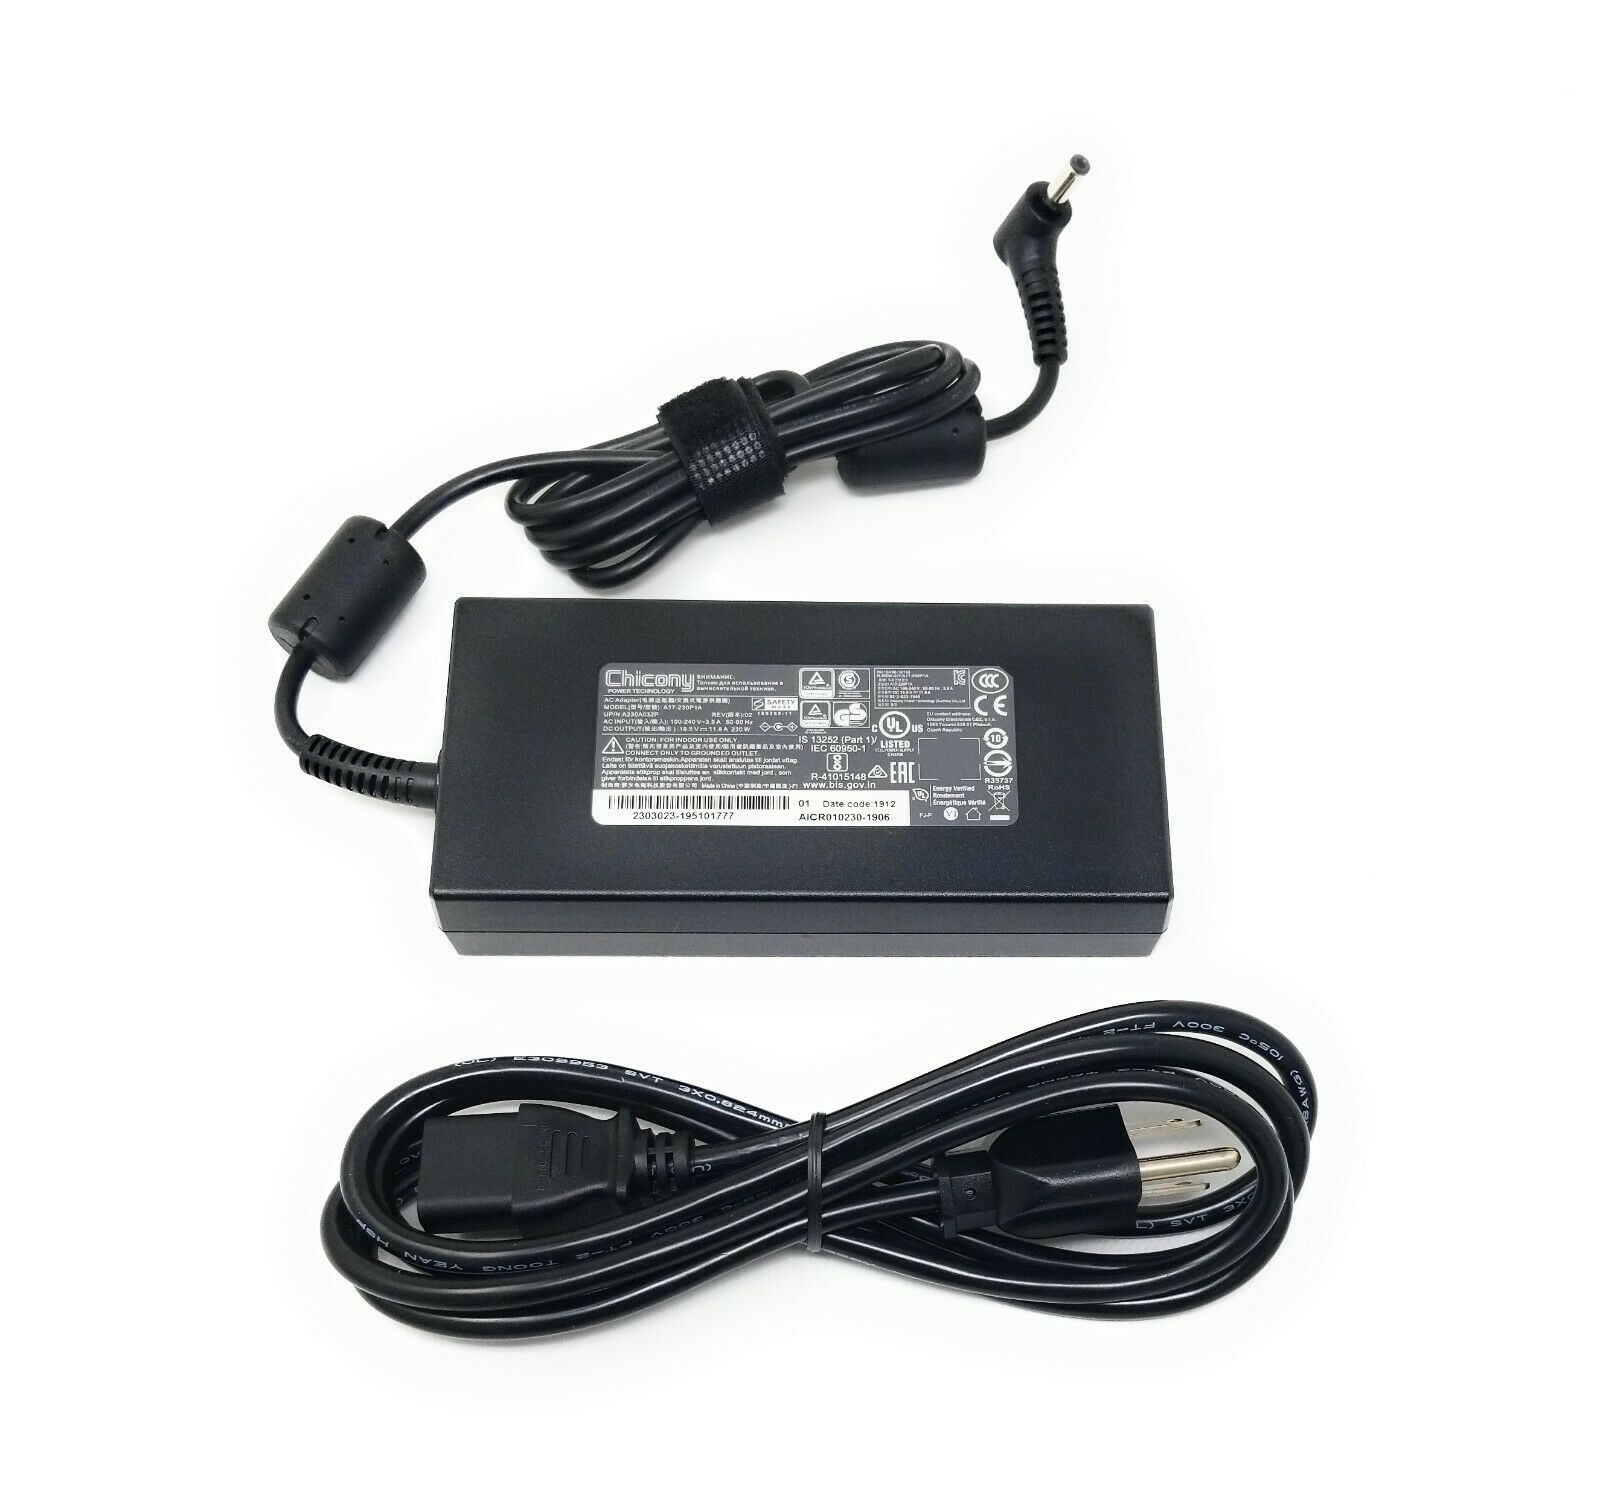 Genuine 19.5V 11.8A 230W Chicony Charger A17-230P1A for Asus ROG Gaming Laptops Compatible Brand: